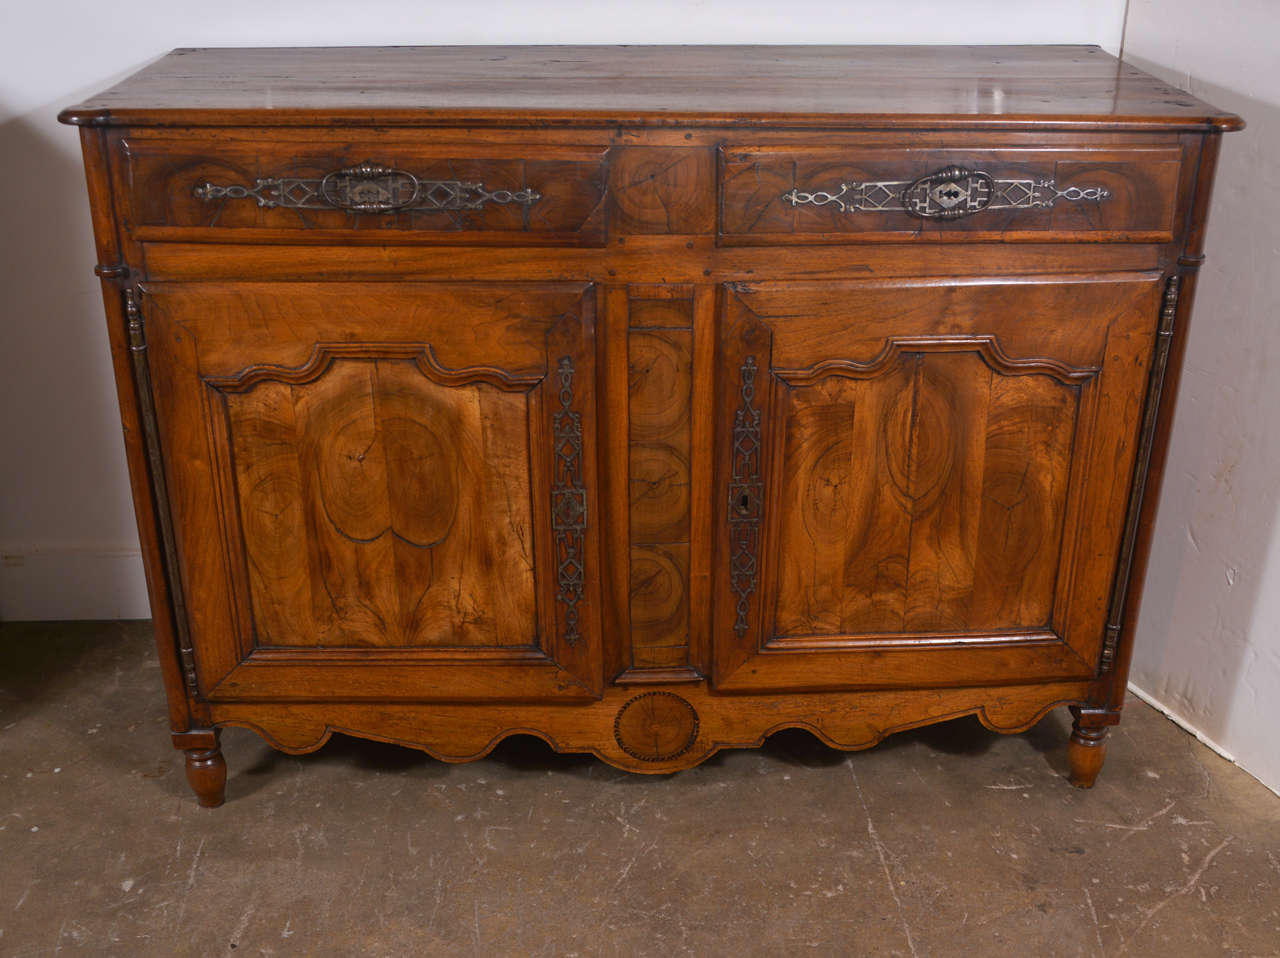 18th century French walnut buffet with oyster veneer and impressive pewter oversized hardware, circa 1780.